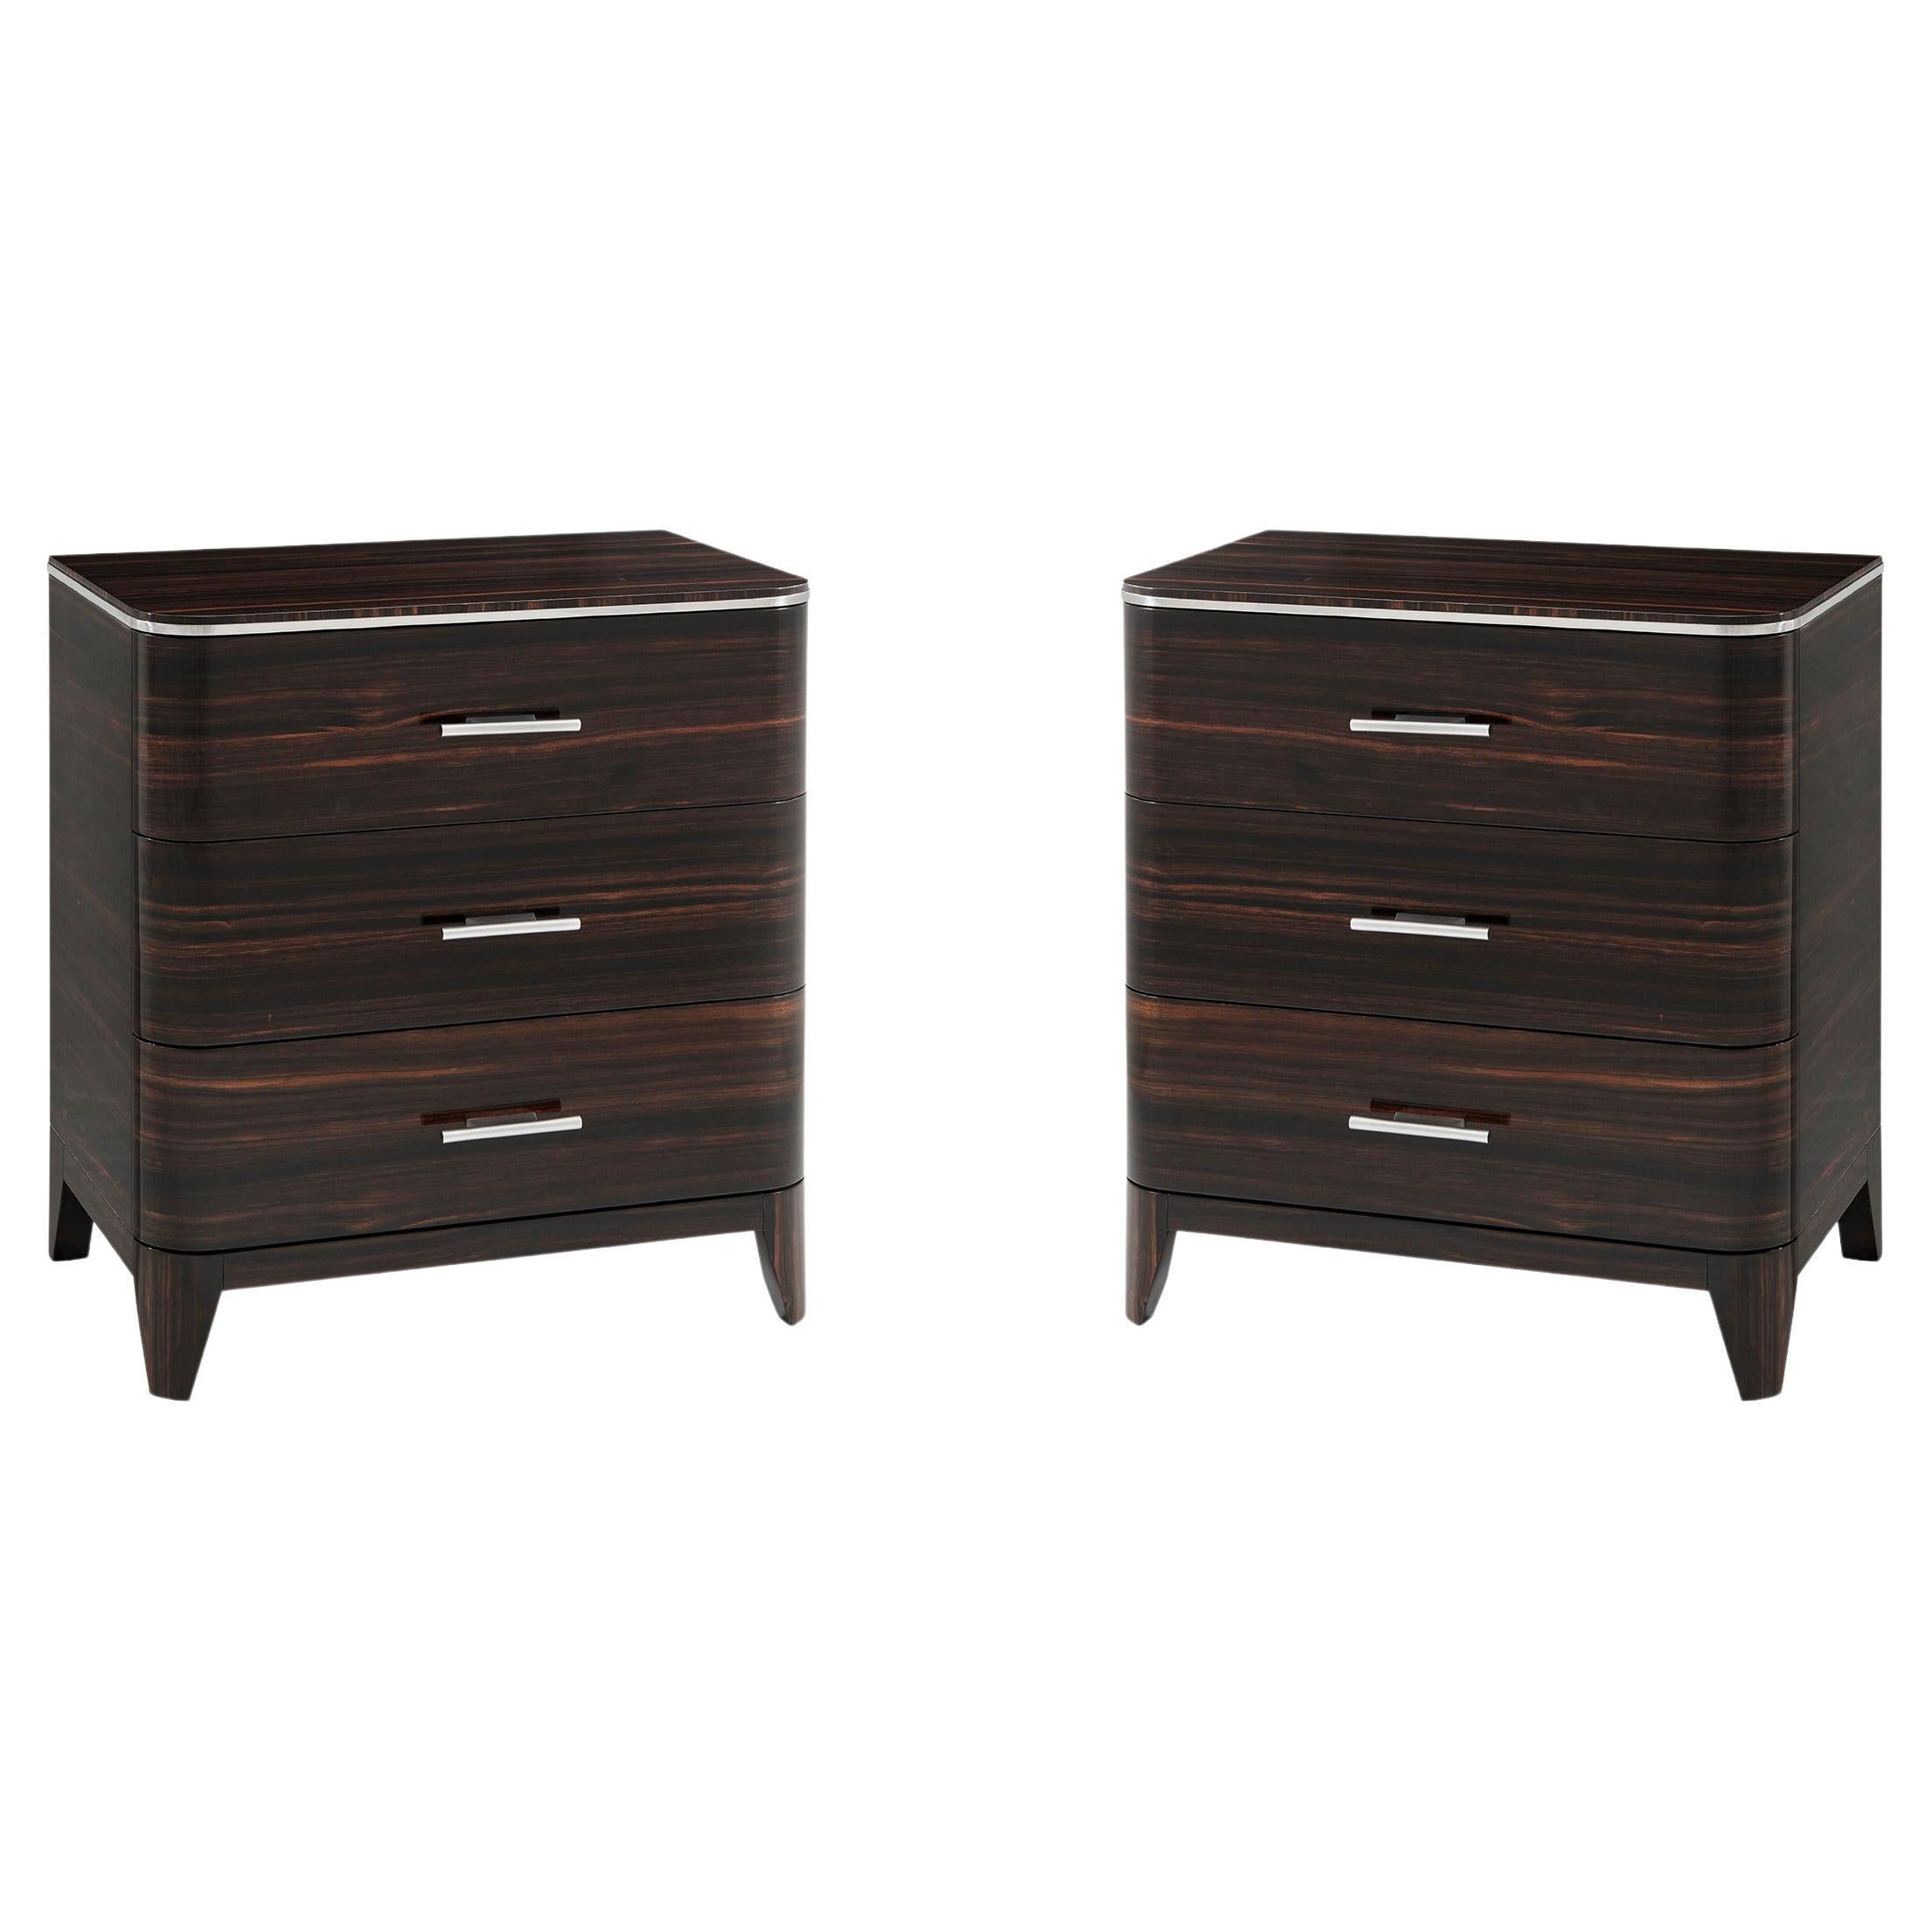 Pair of Art Deco Style Large Nightstands